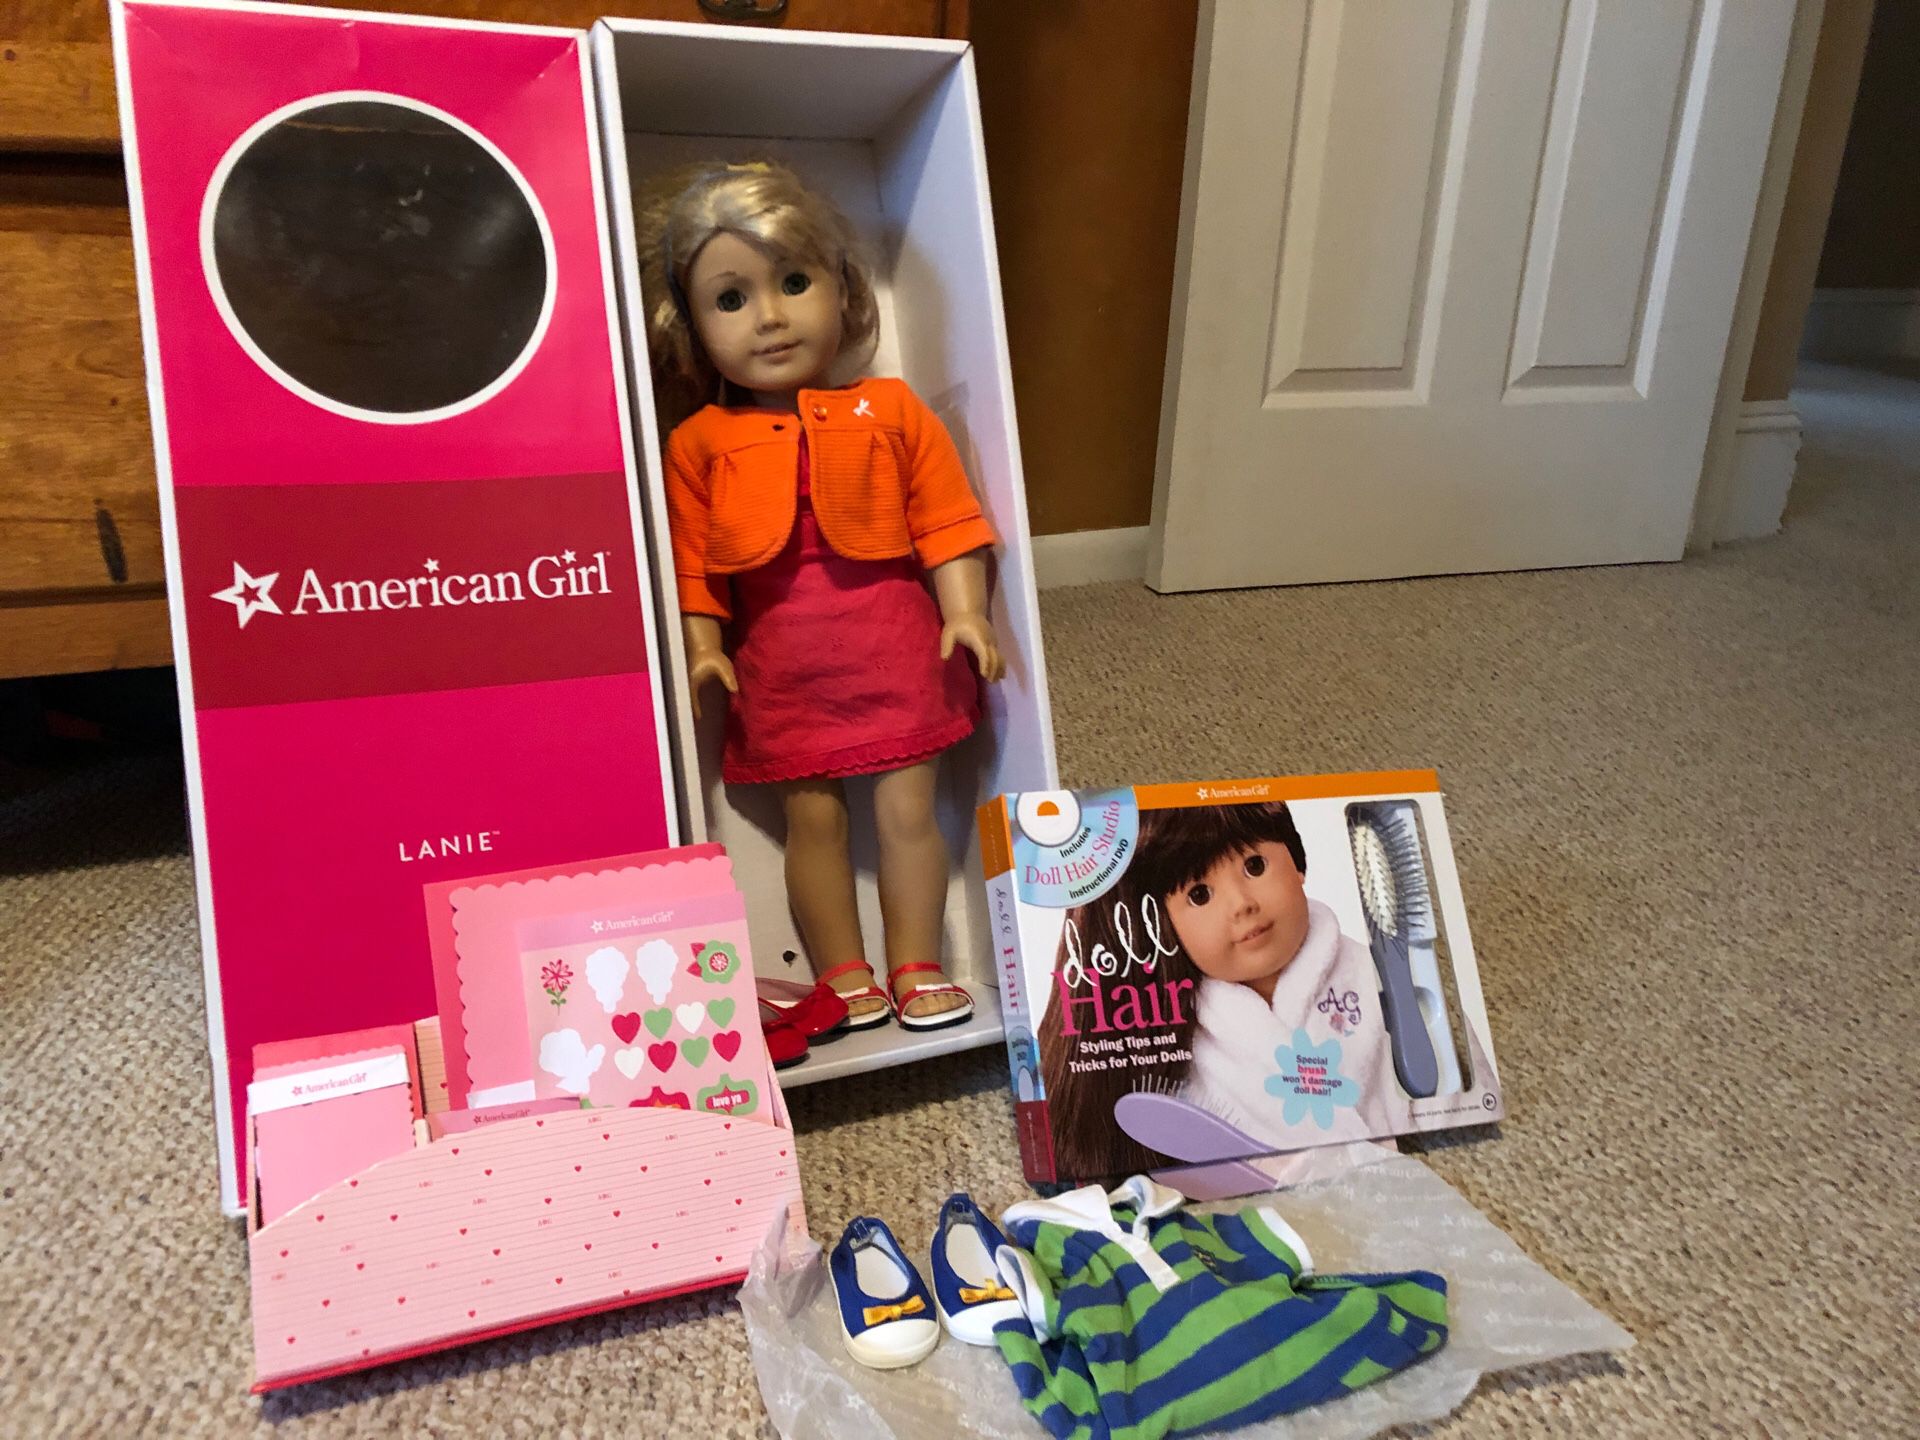 American Girl doll Lanie, with accessories